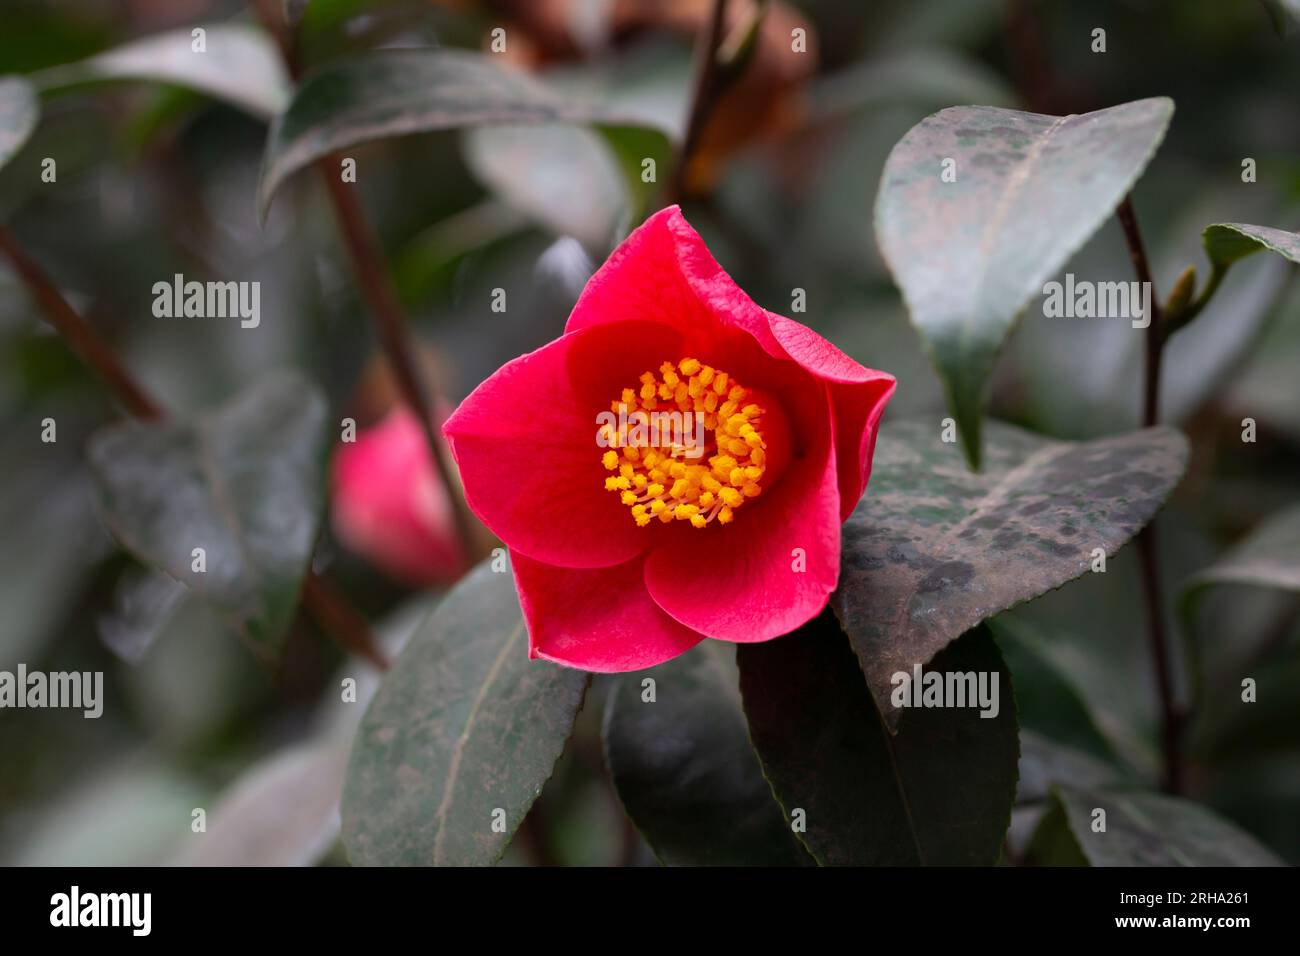 Blossom of red camelia japonica, Uso Otome variety, lpetal camellia, japanese camellia. Stock Photo